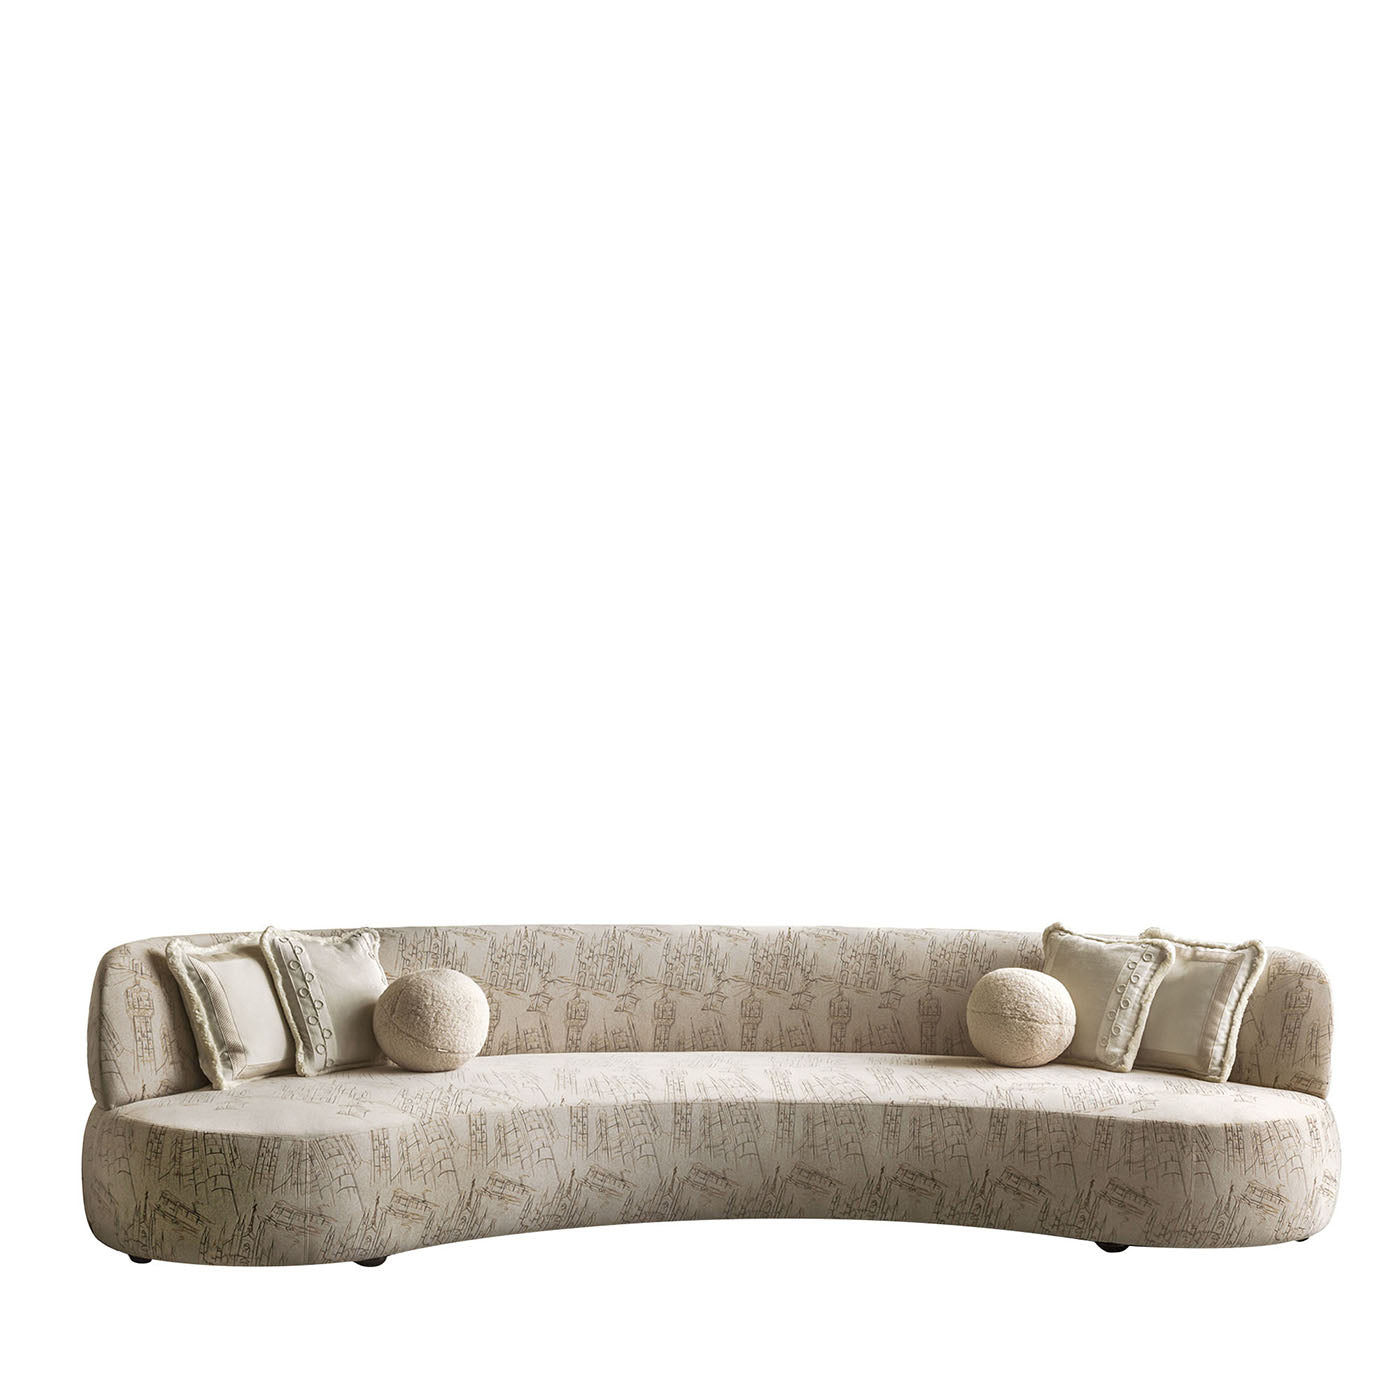 Duse Cityscape-Embroidered Beige Fabric Sofa - Main view